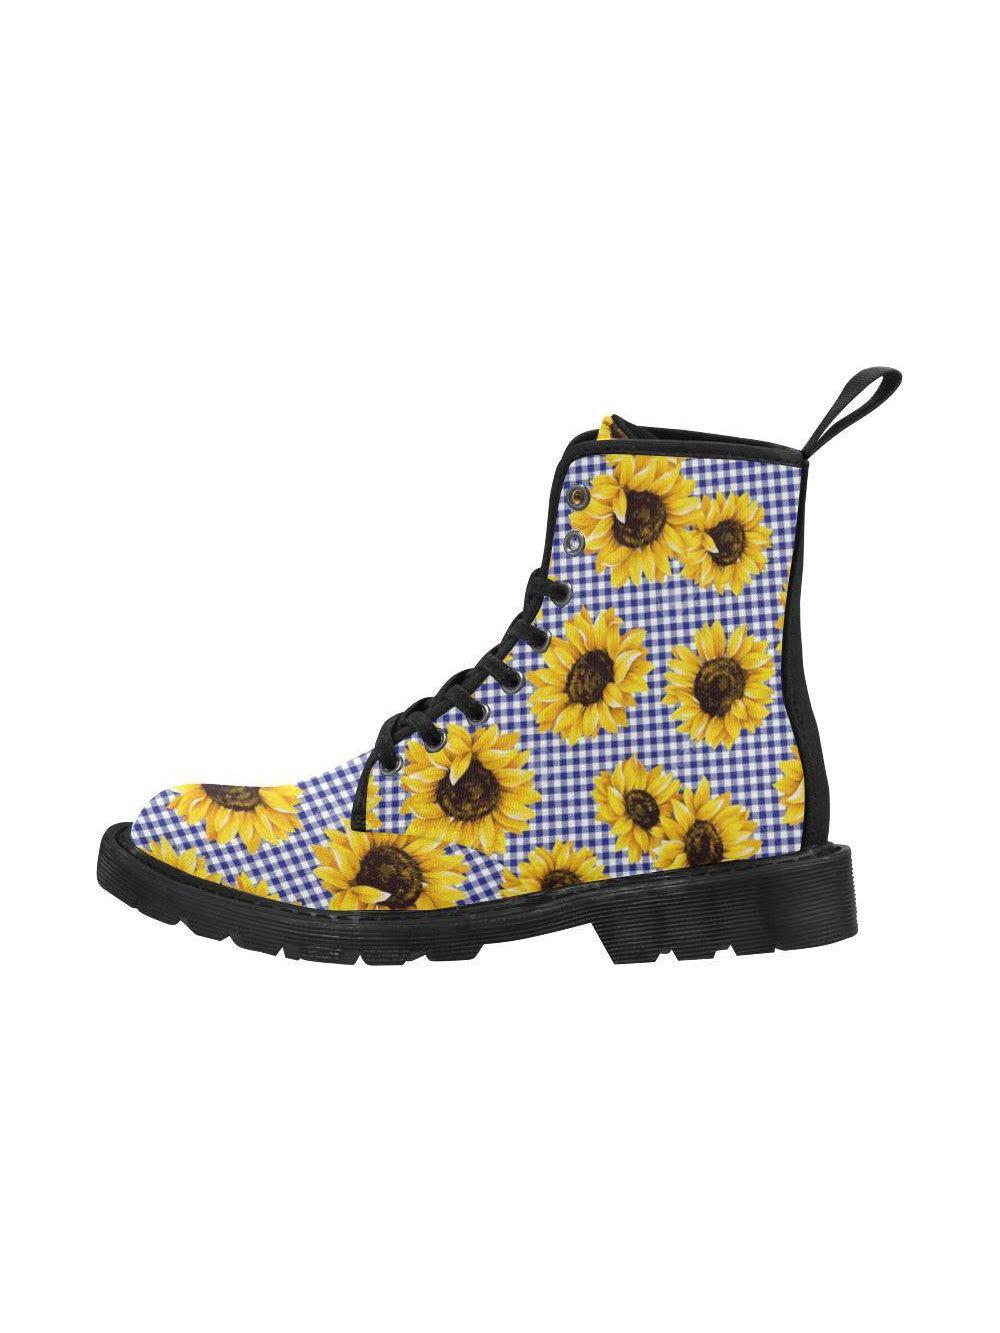 SUNFLOWERS GINGHAM Women's Lace Up Canvas Boots